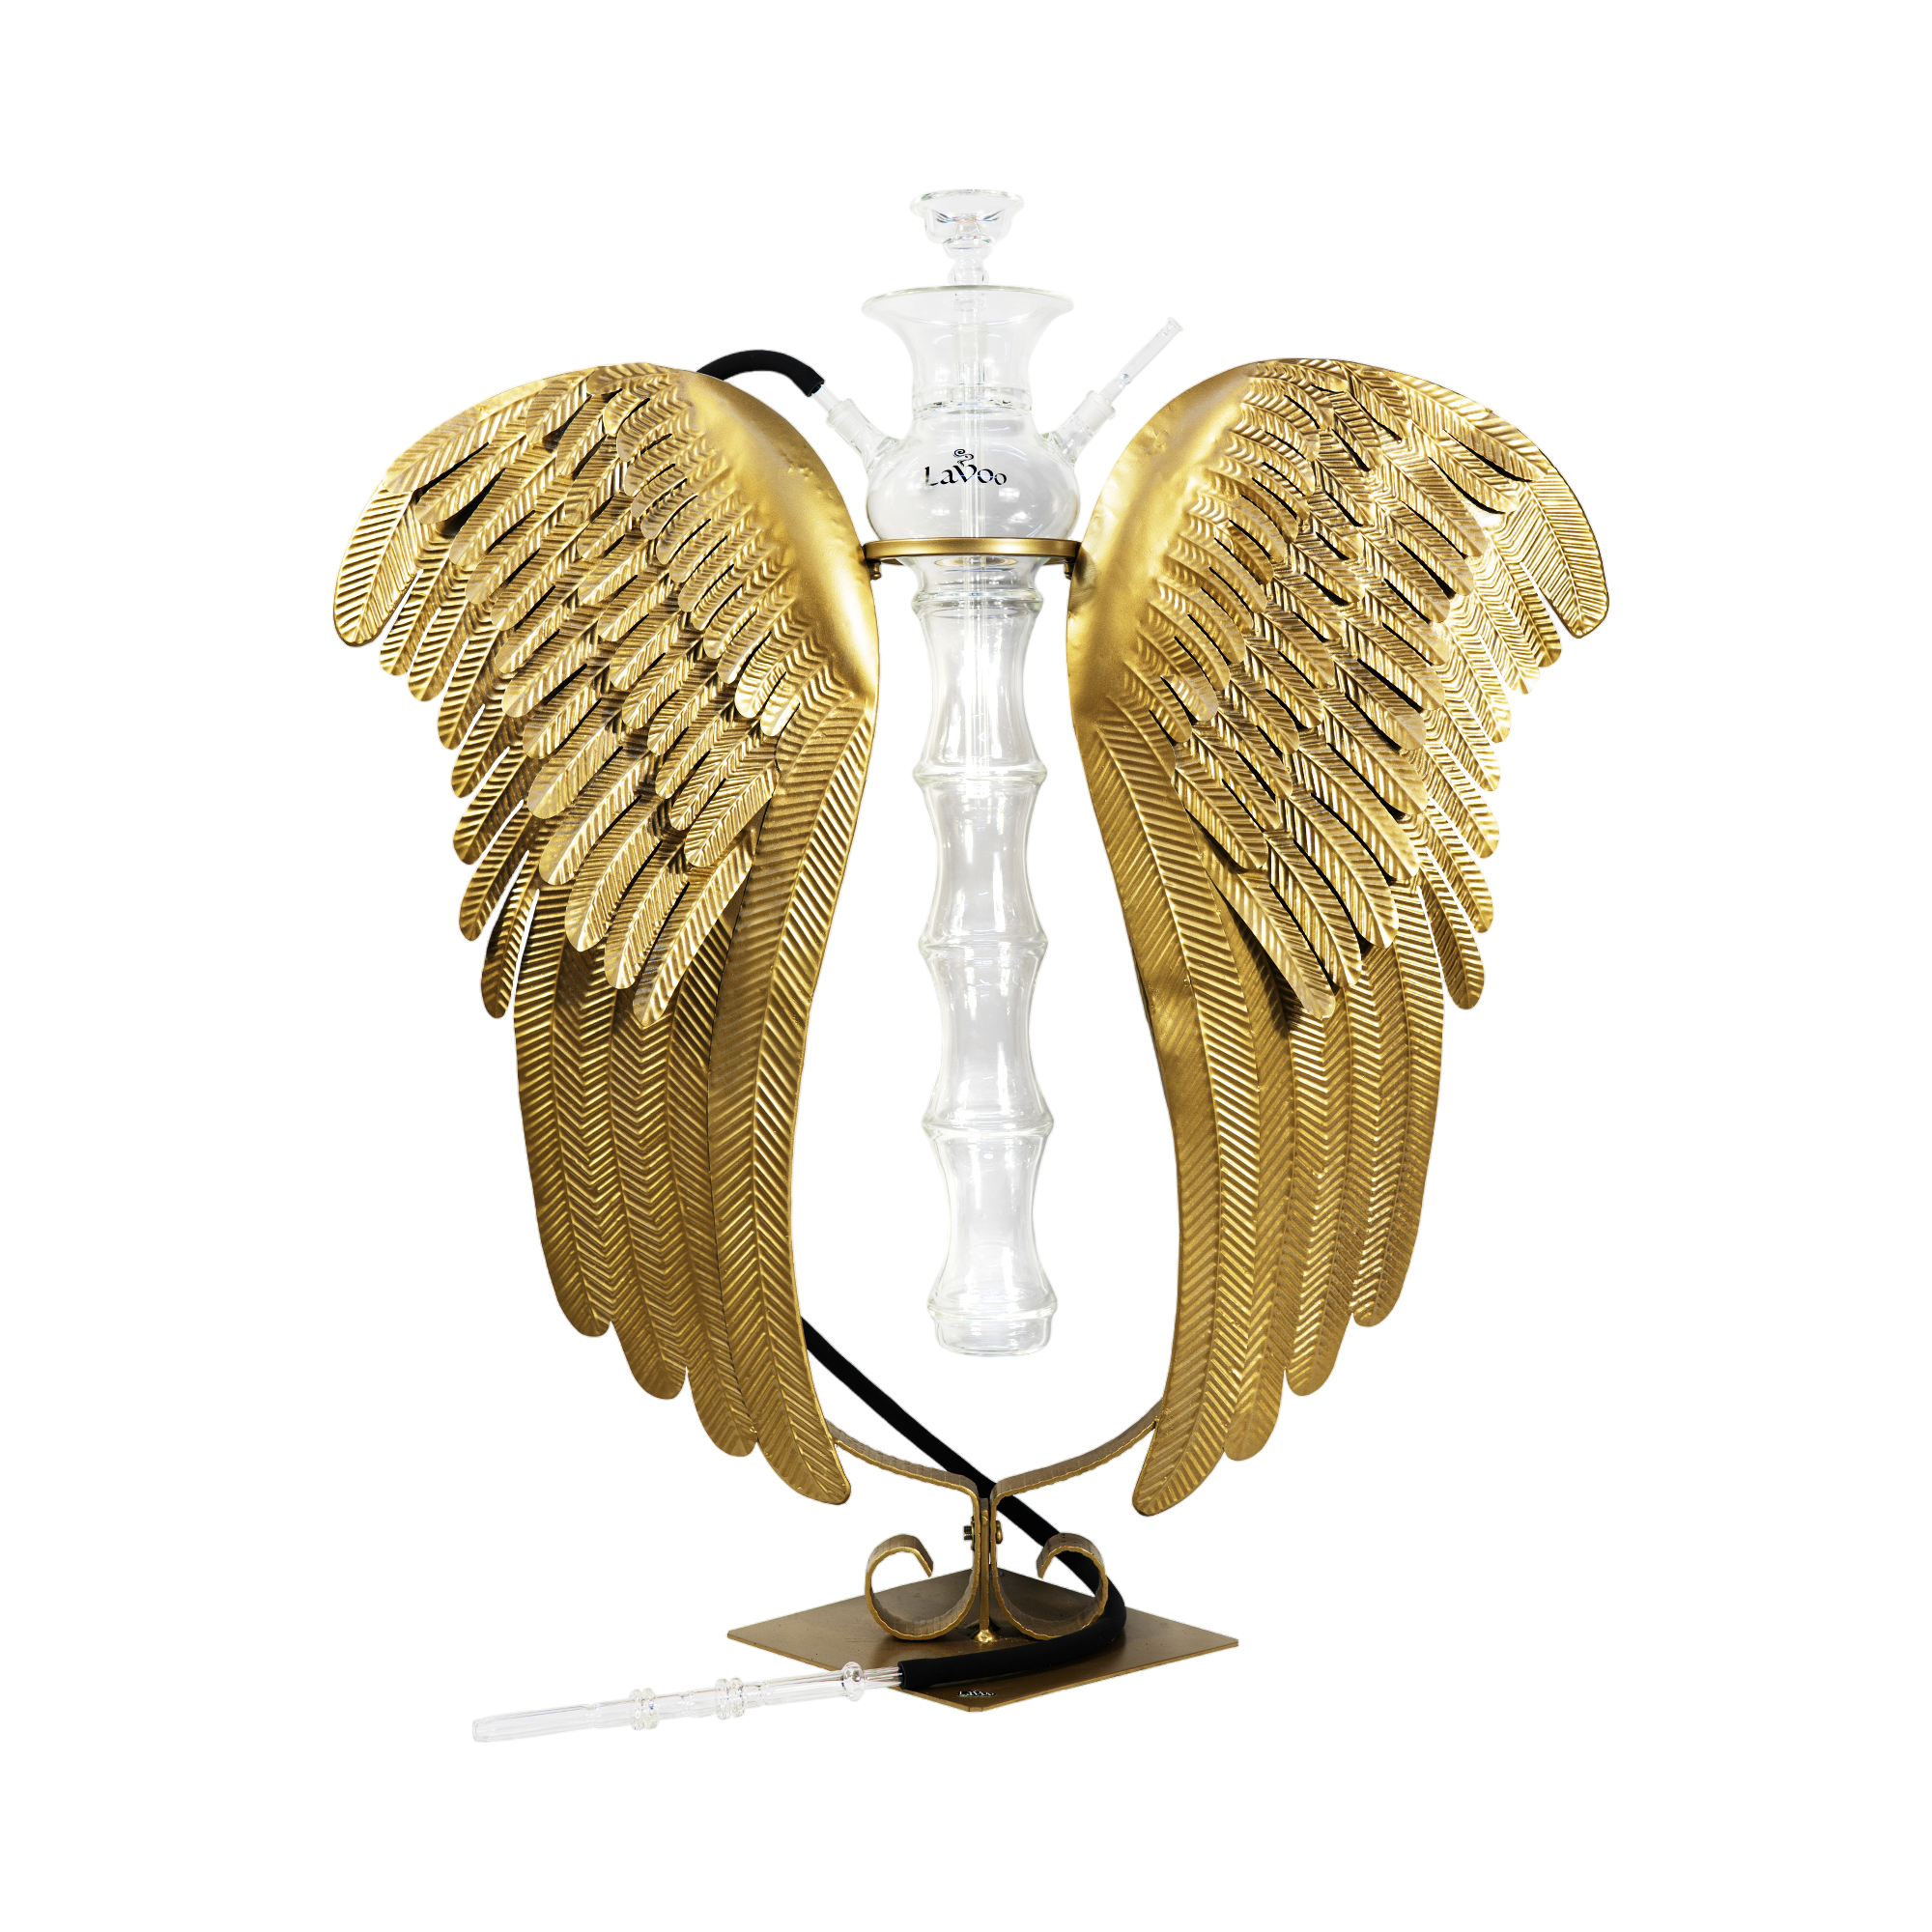 Lavoo ArchAngel Hookah with Handblown Glass and Rustic Wing Stand - Lavoo